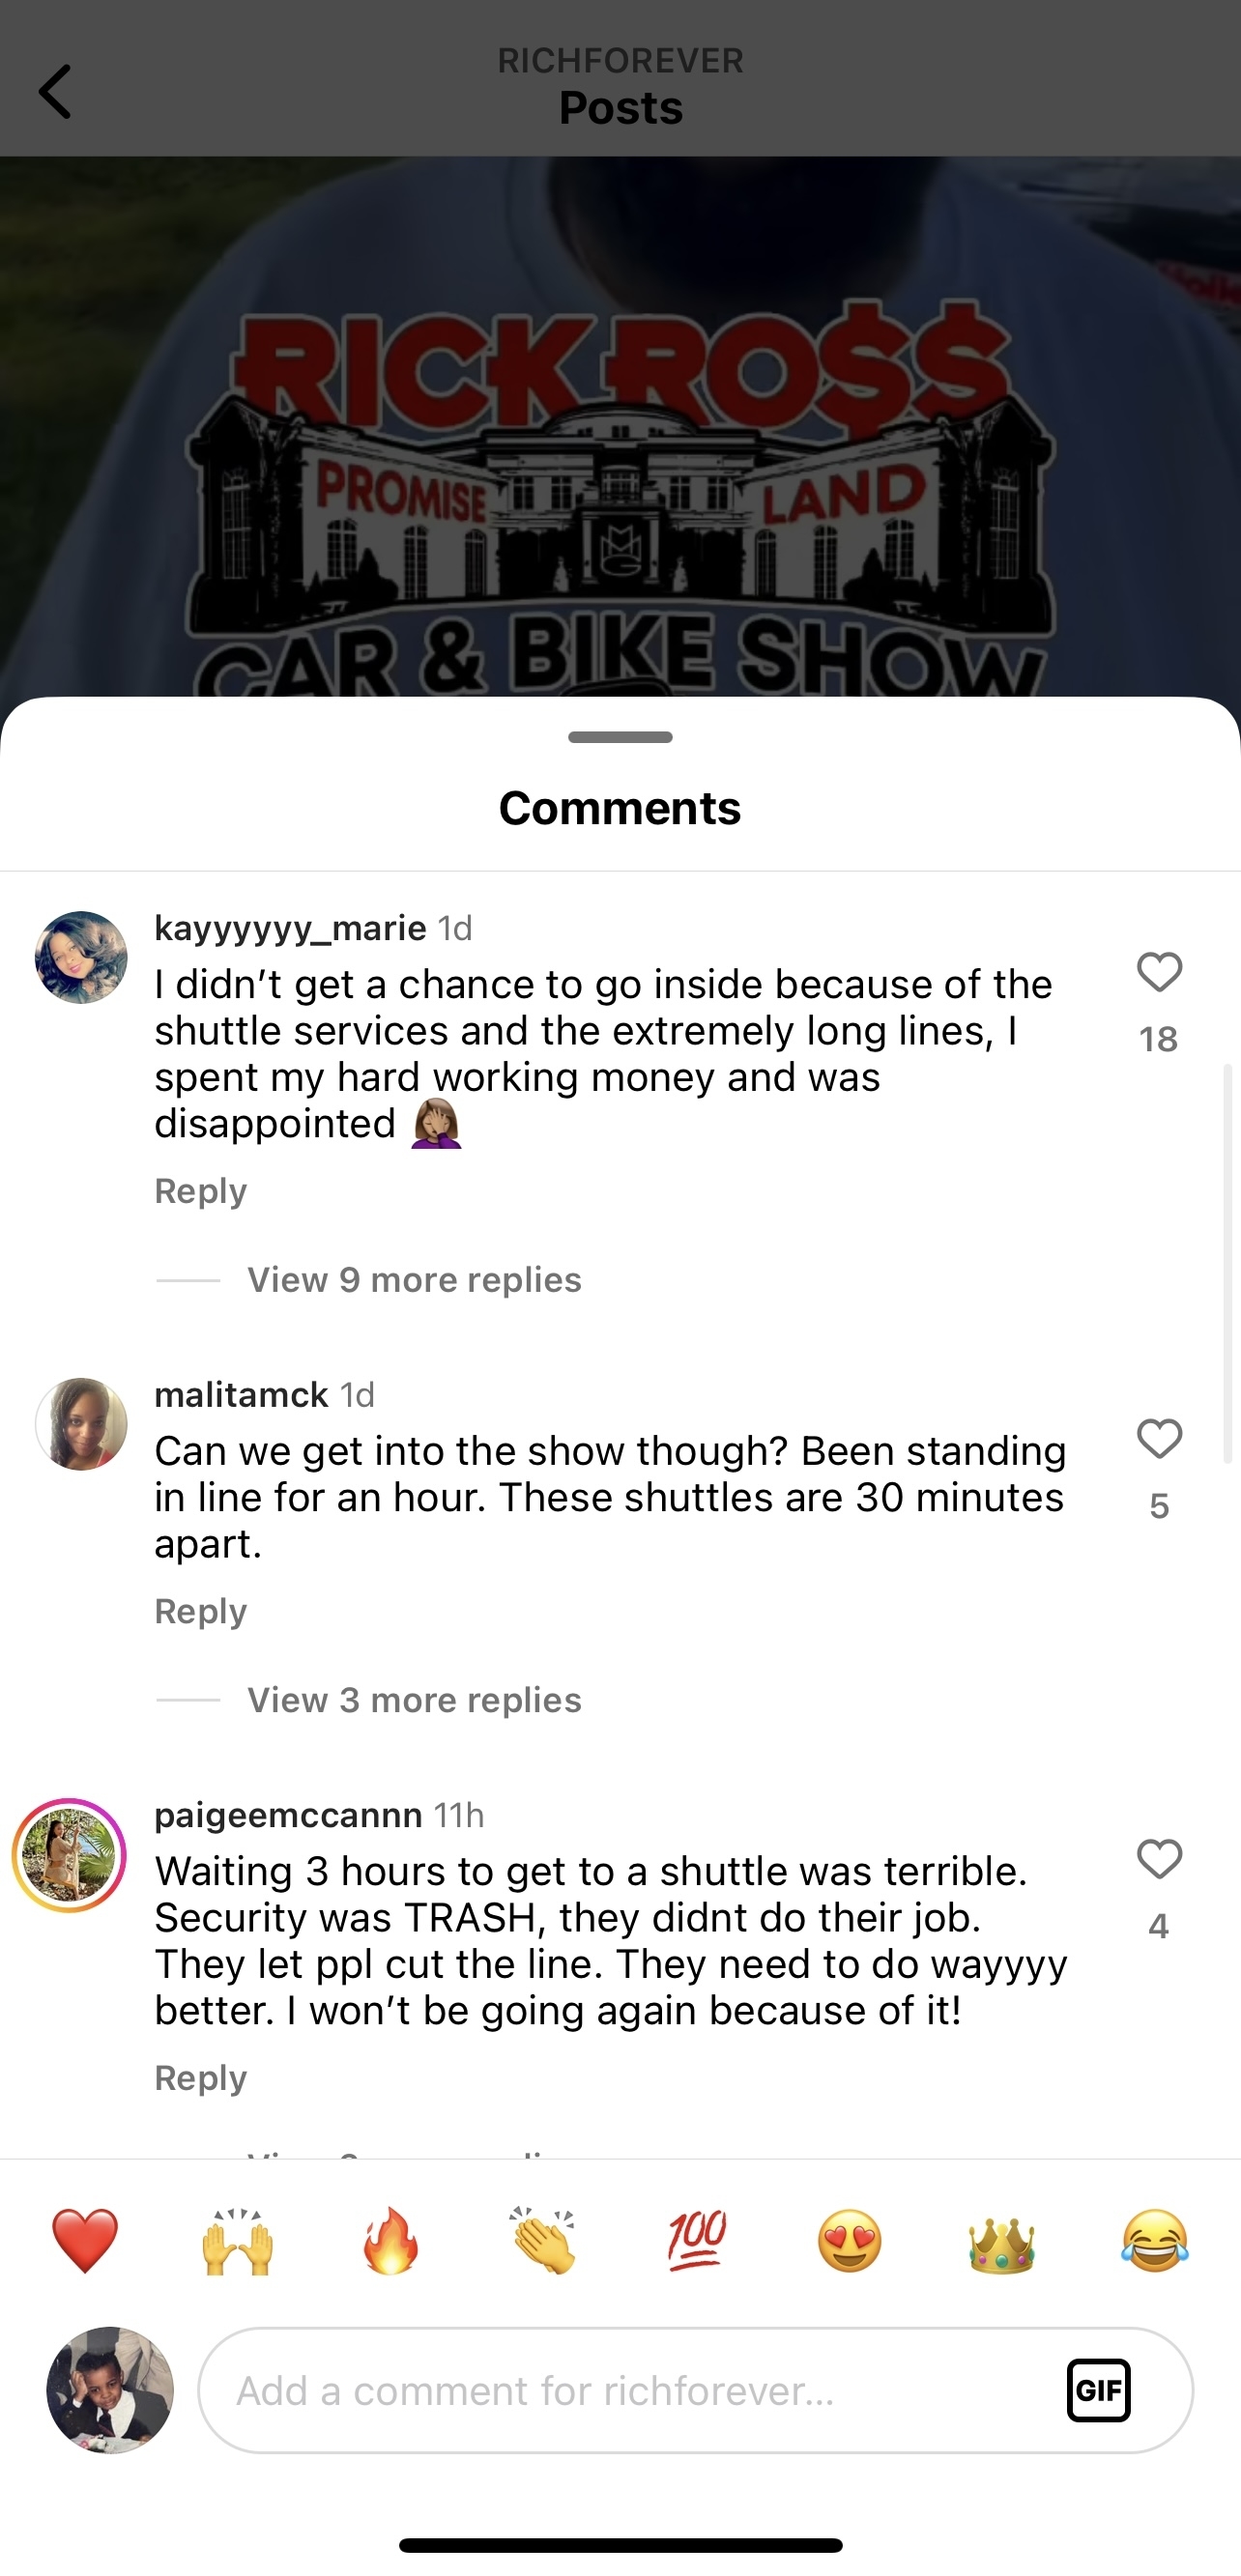 Screenshot of Instagram comments on Rick Ross&#x27;s post about the Car &amp; Bike Show. Complaints about long lines and shuttle service issues, including difficulty getting in and cutting in line